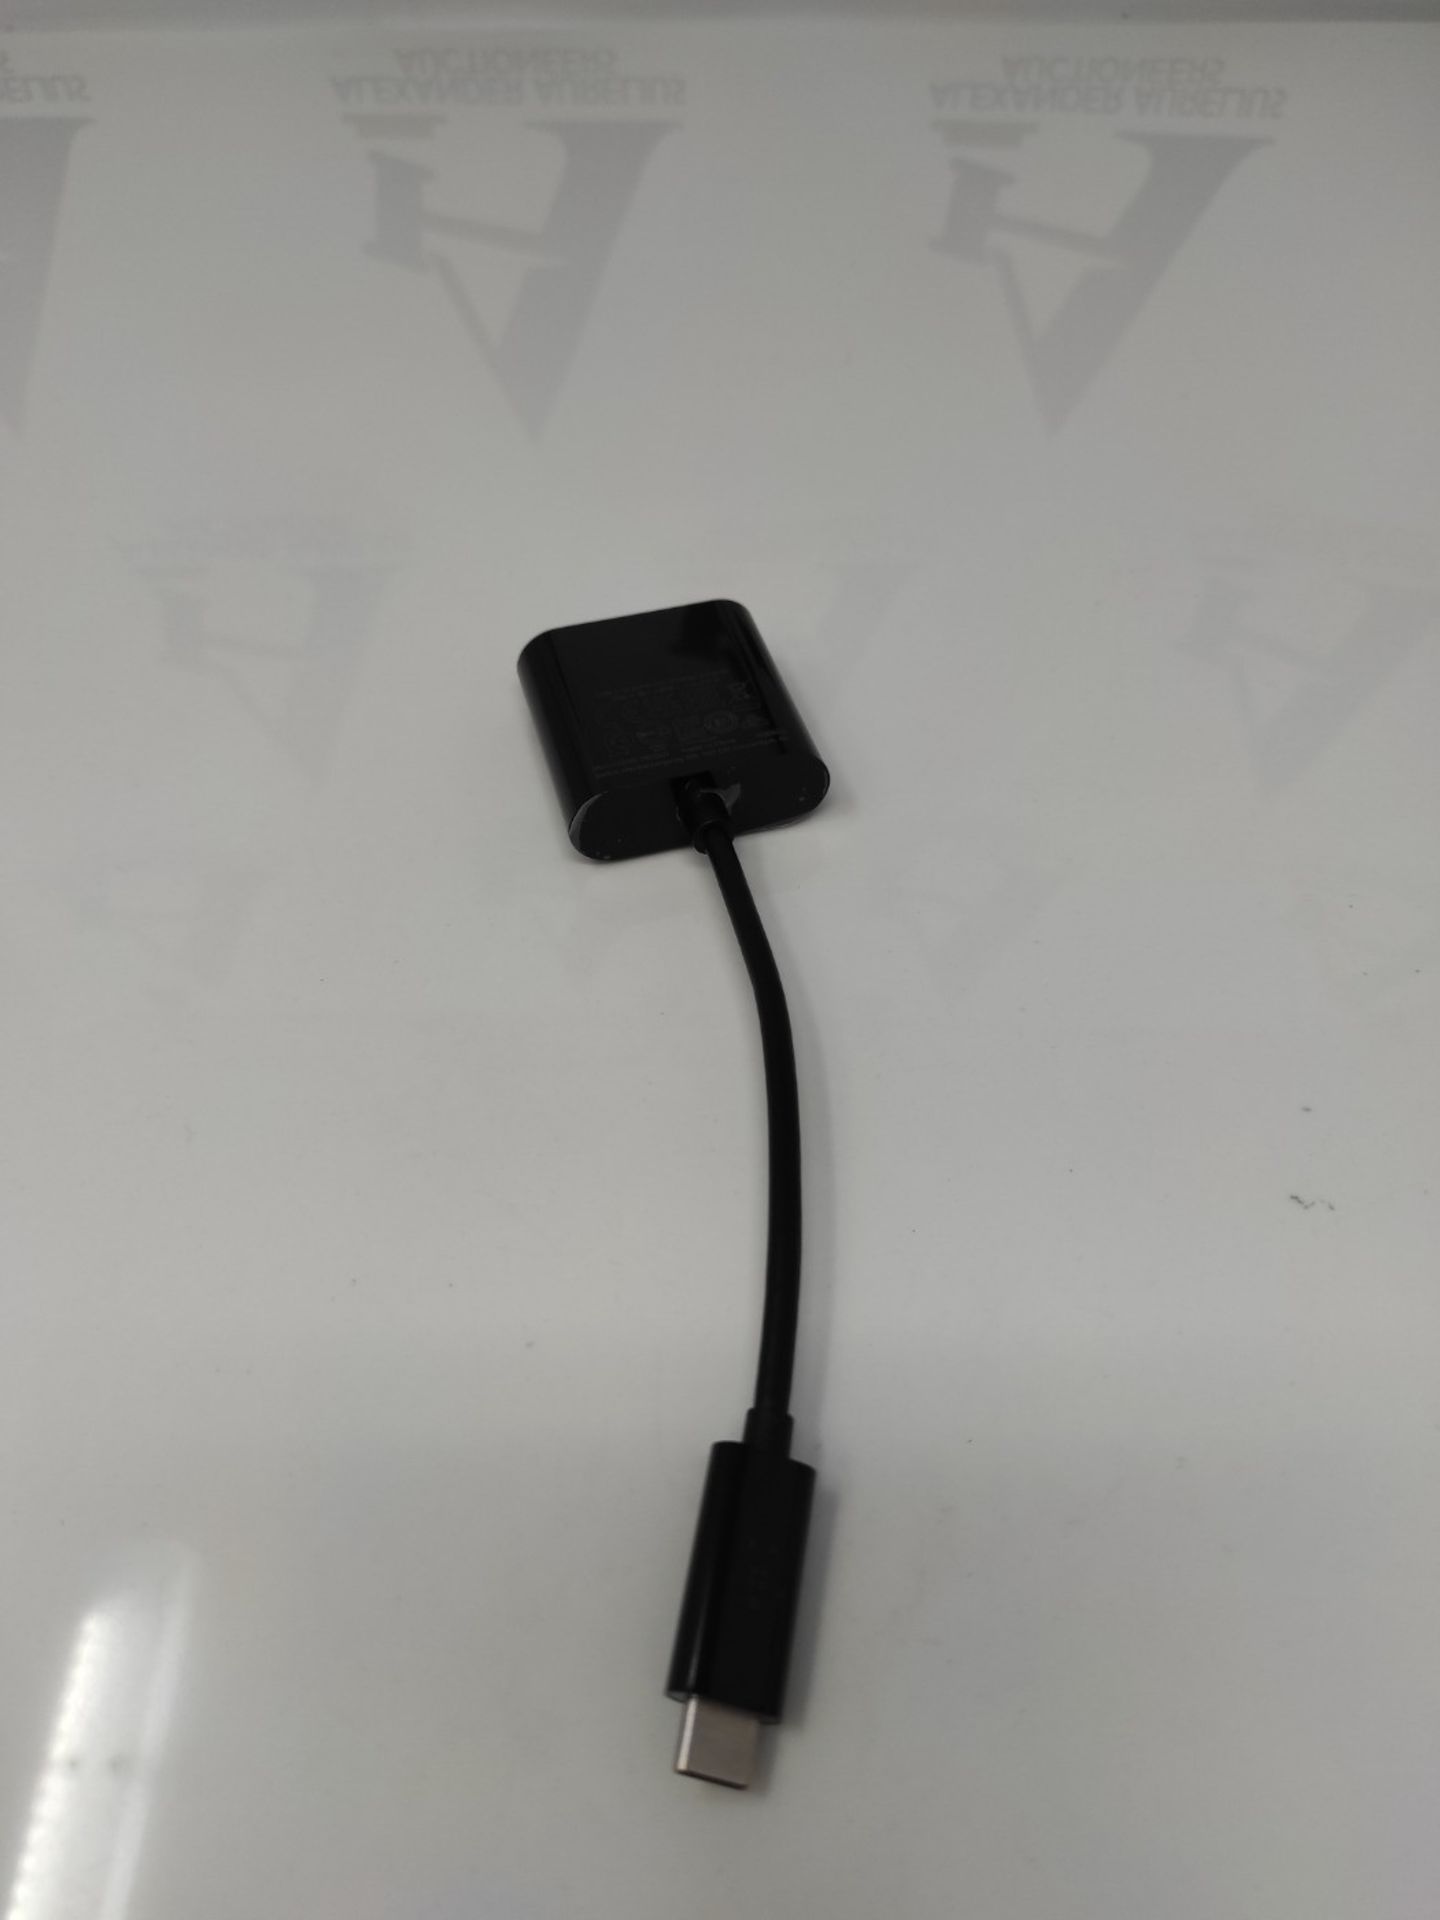 Belkin USB-C to Ethernet Adapter + Charge (60W Passthrough Power for Connected Devices - Image 2 of 2